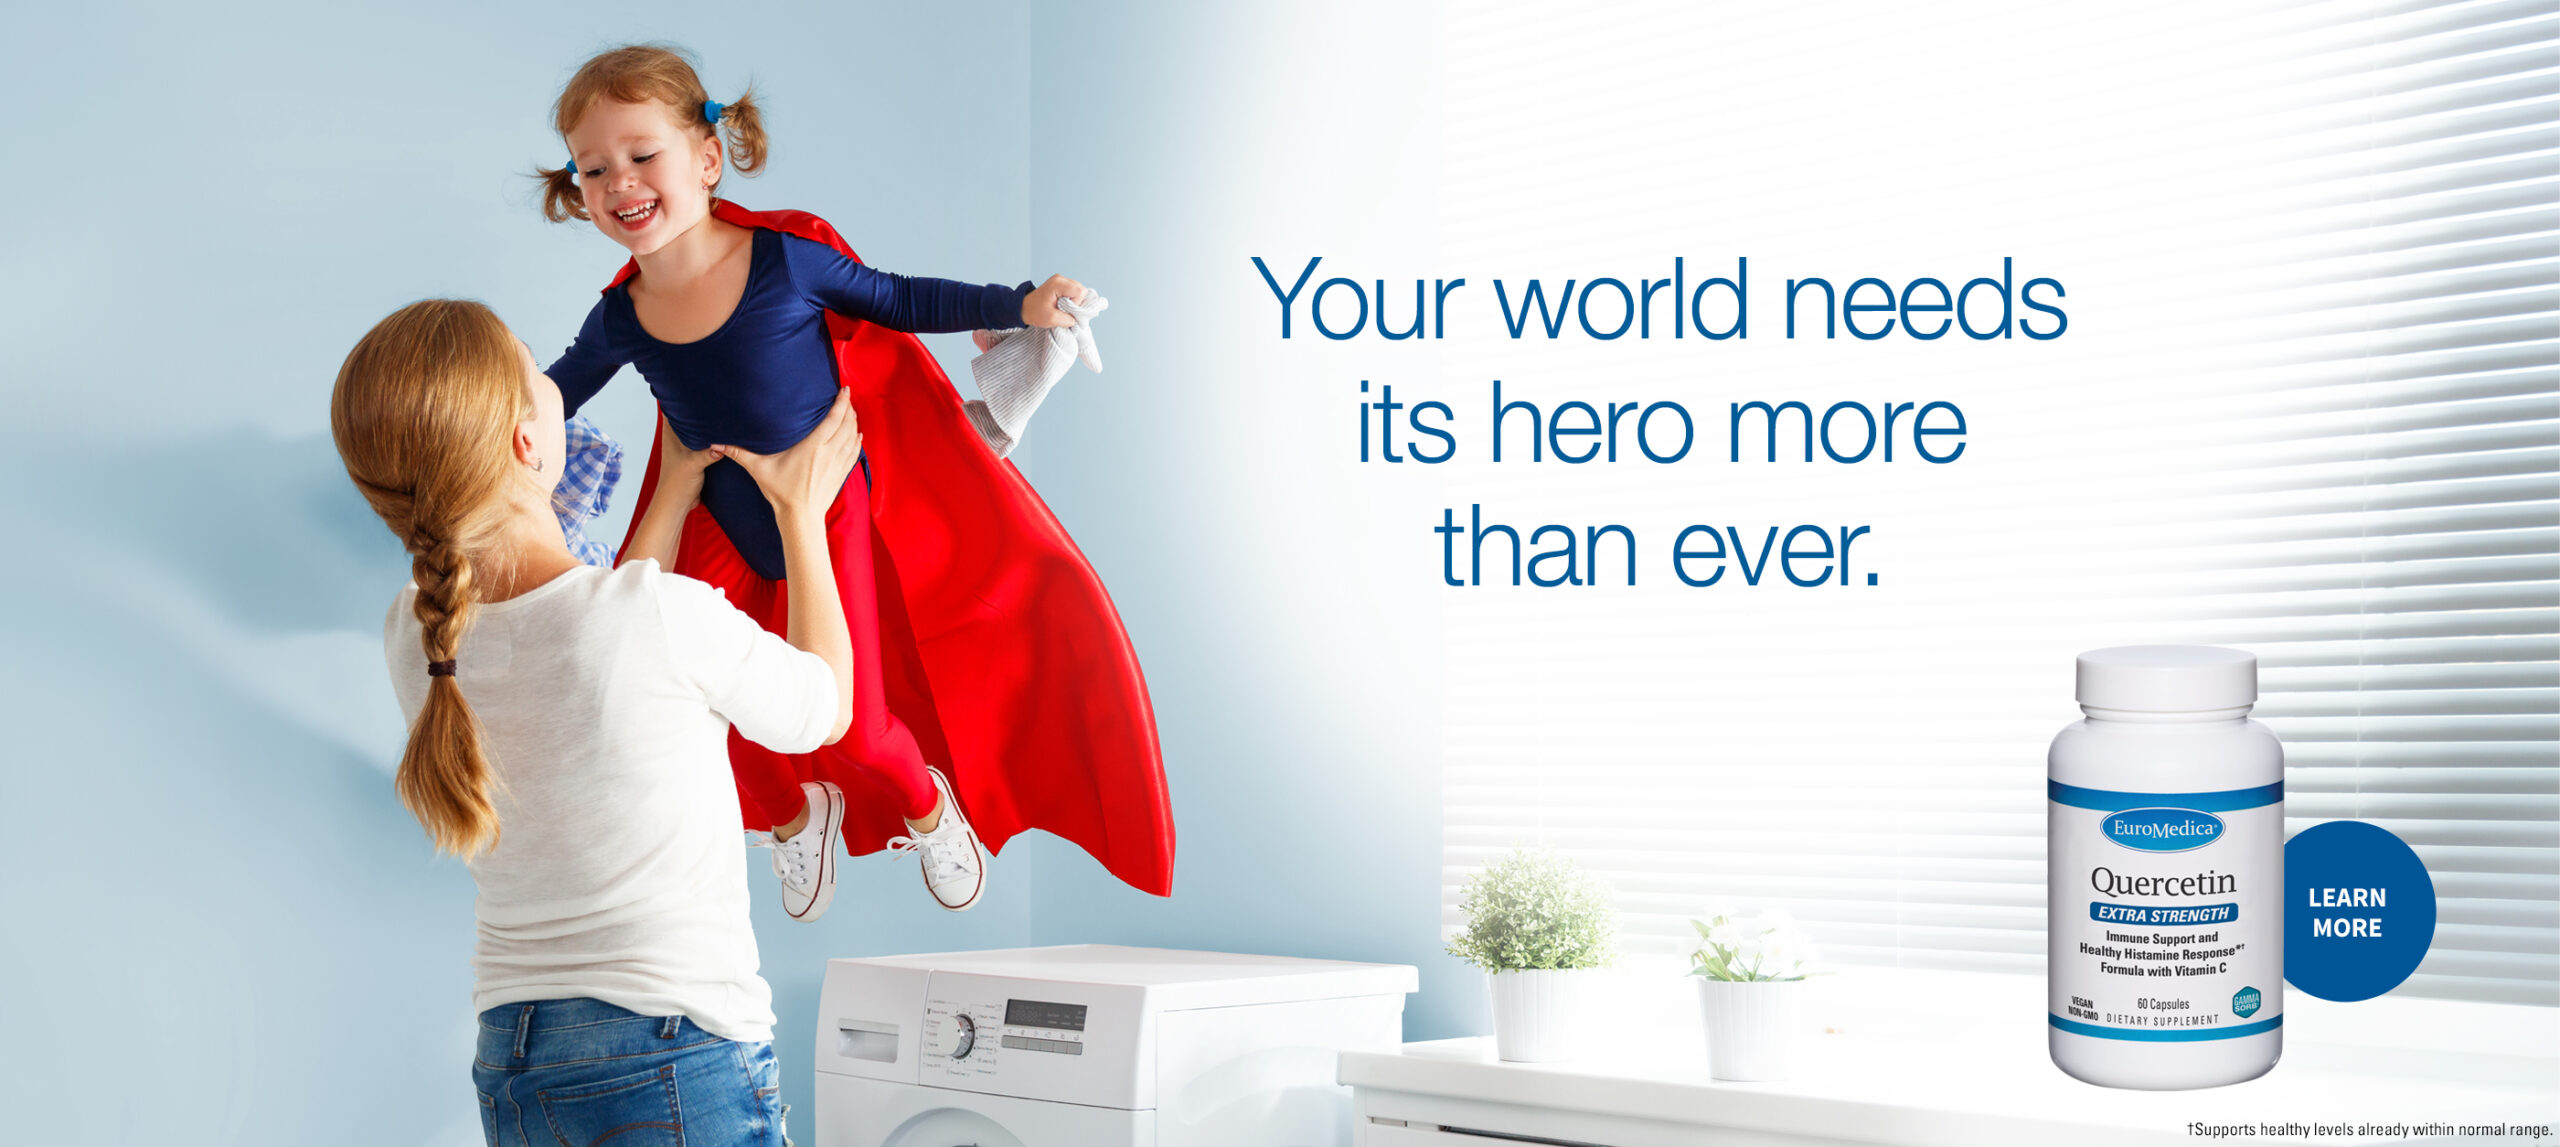 Your world needs its hero more than ever. Learn more.